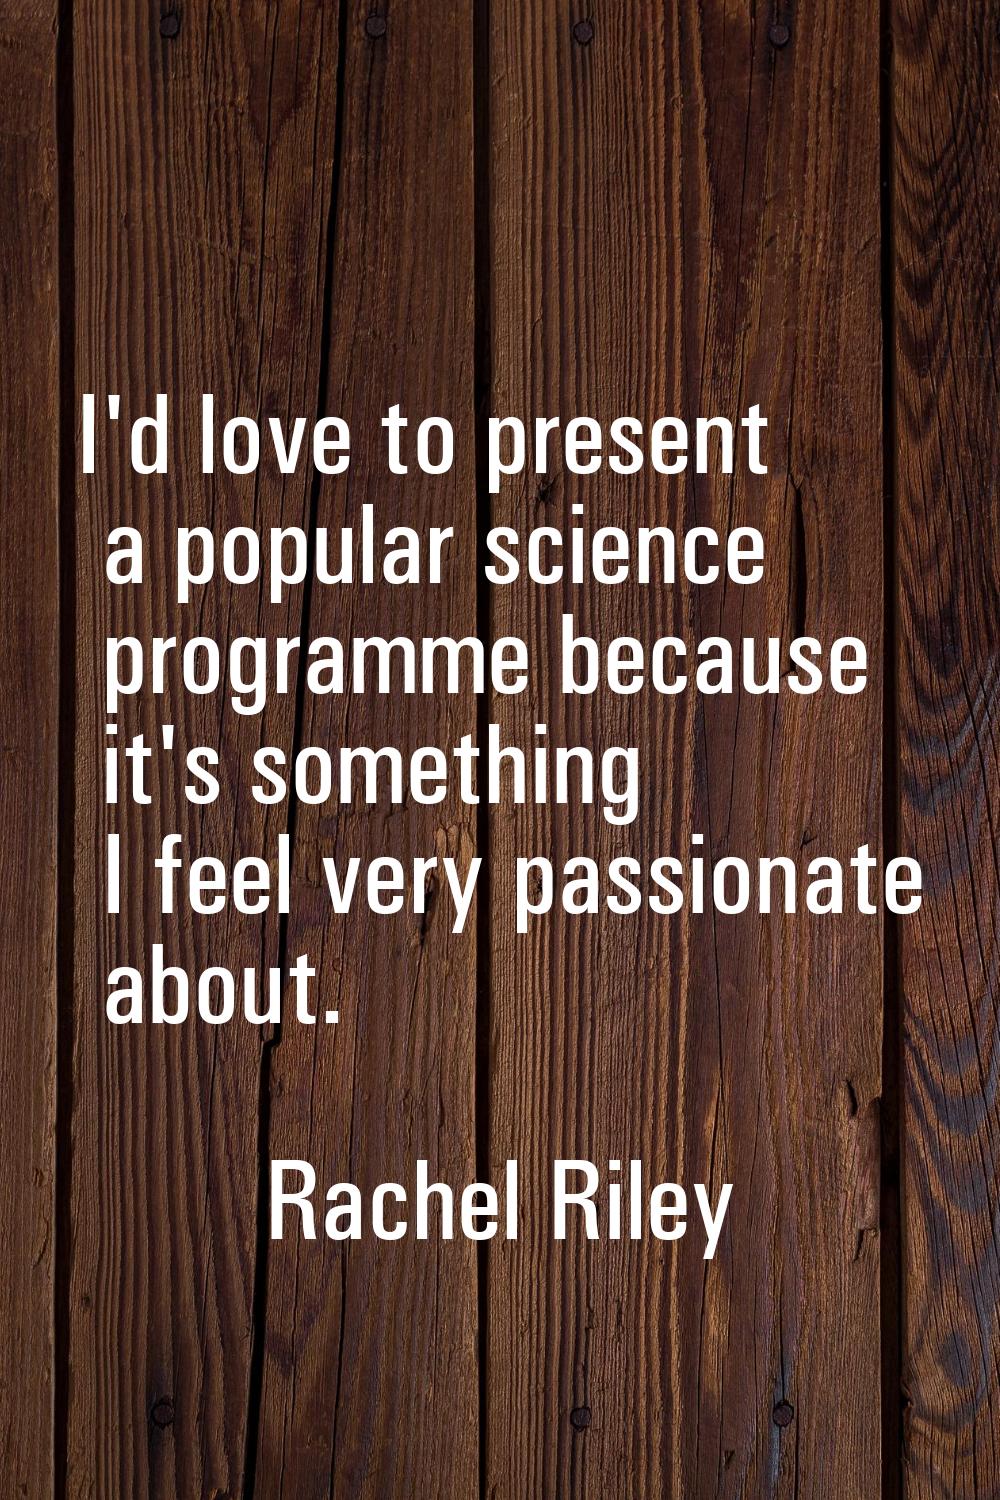 I'd love to present a popular science programme because it's something I feel very passionate about